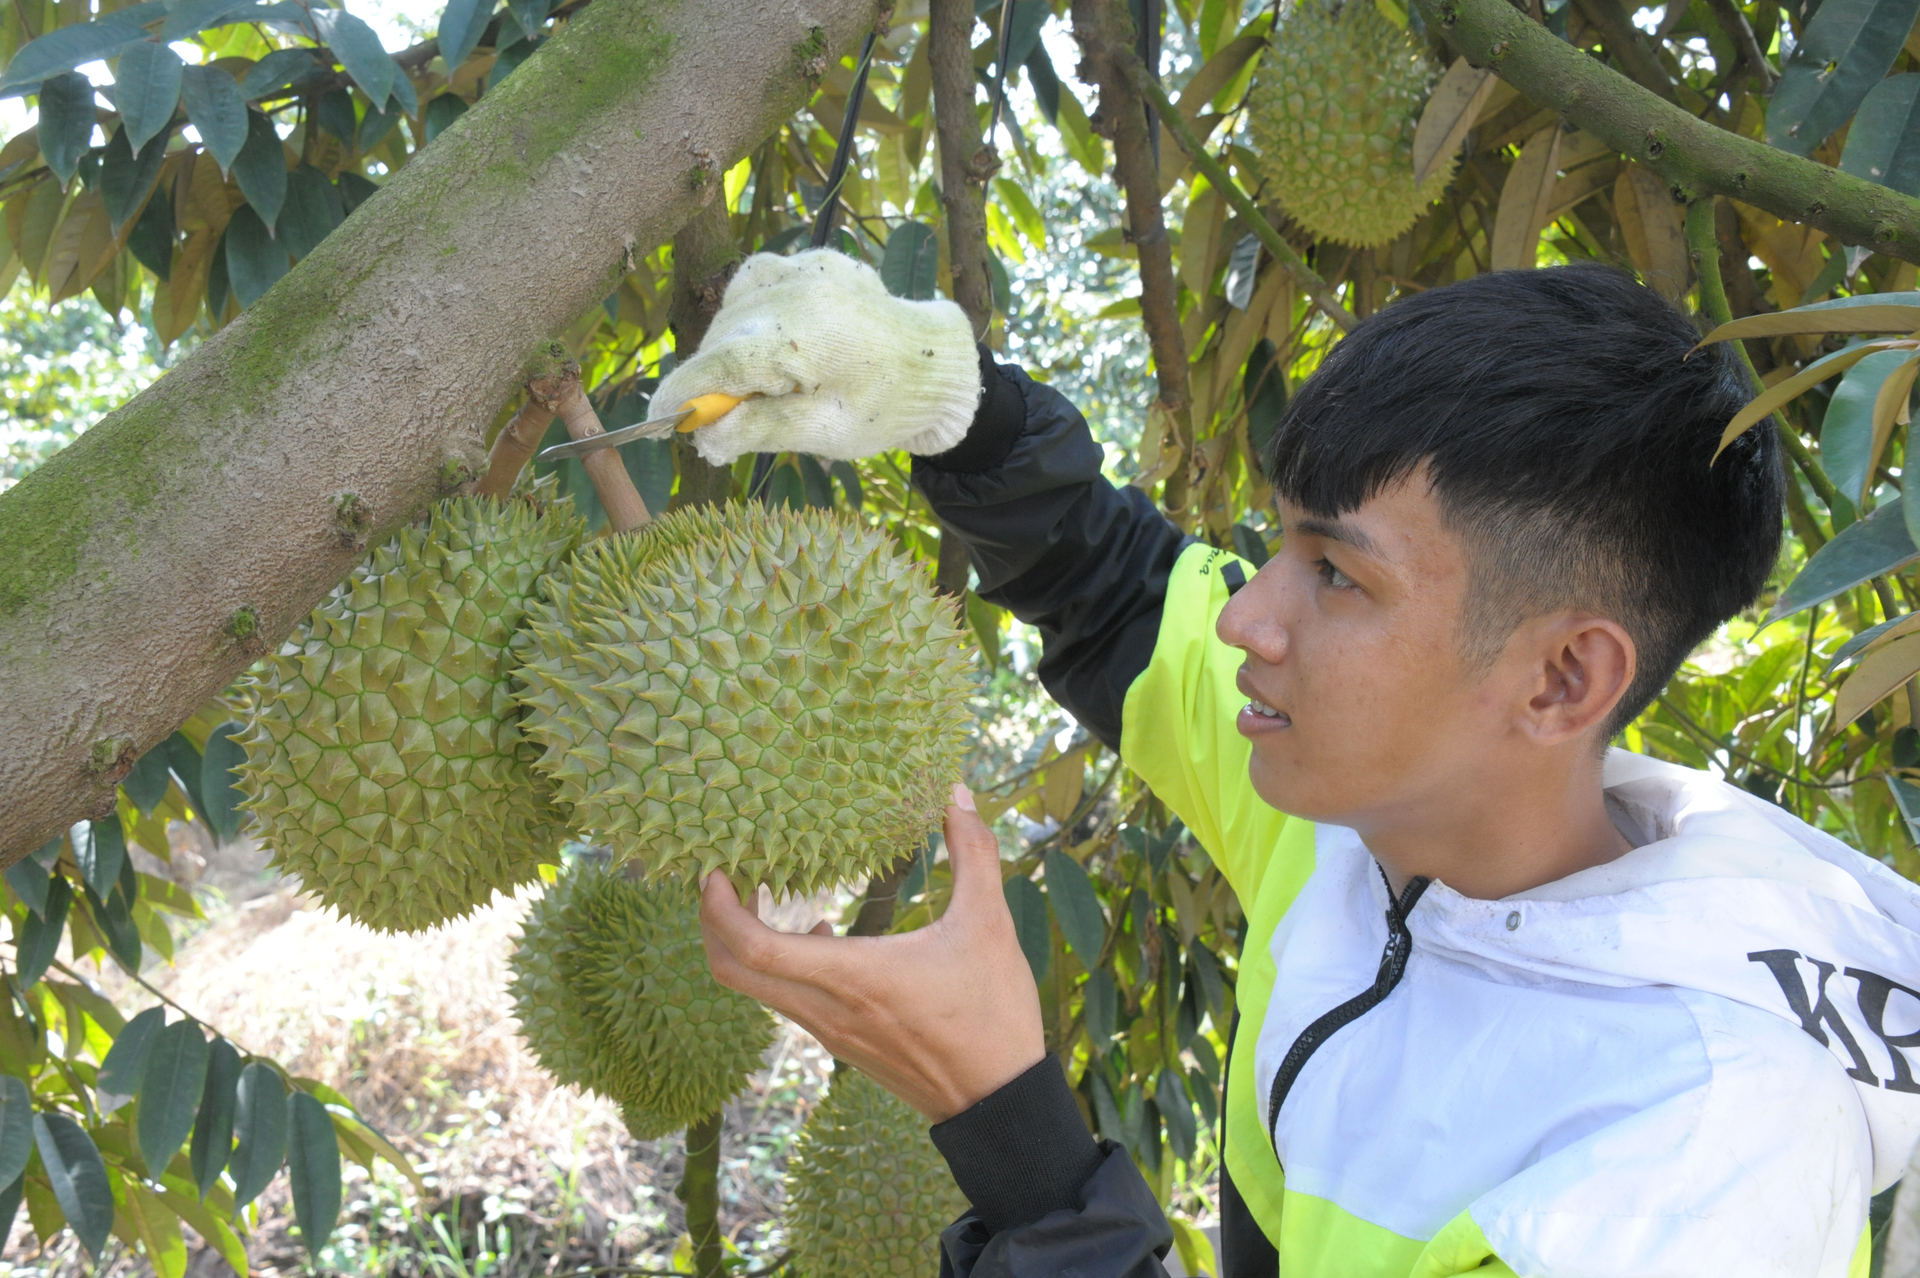 The export of durian in Can Tho city to the Chinese market is not only an important turning point for the durian industry but also creates a motivation for farmers to together produce many valuable agro-products in service of export. Photo: Le Hoang Vu.